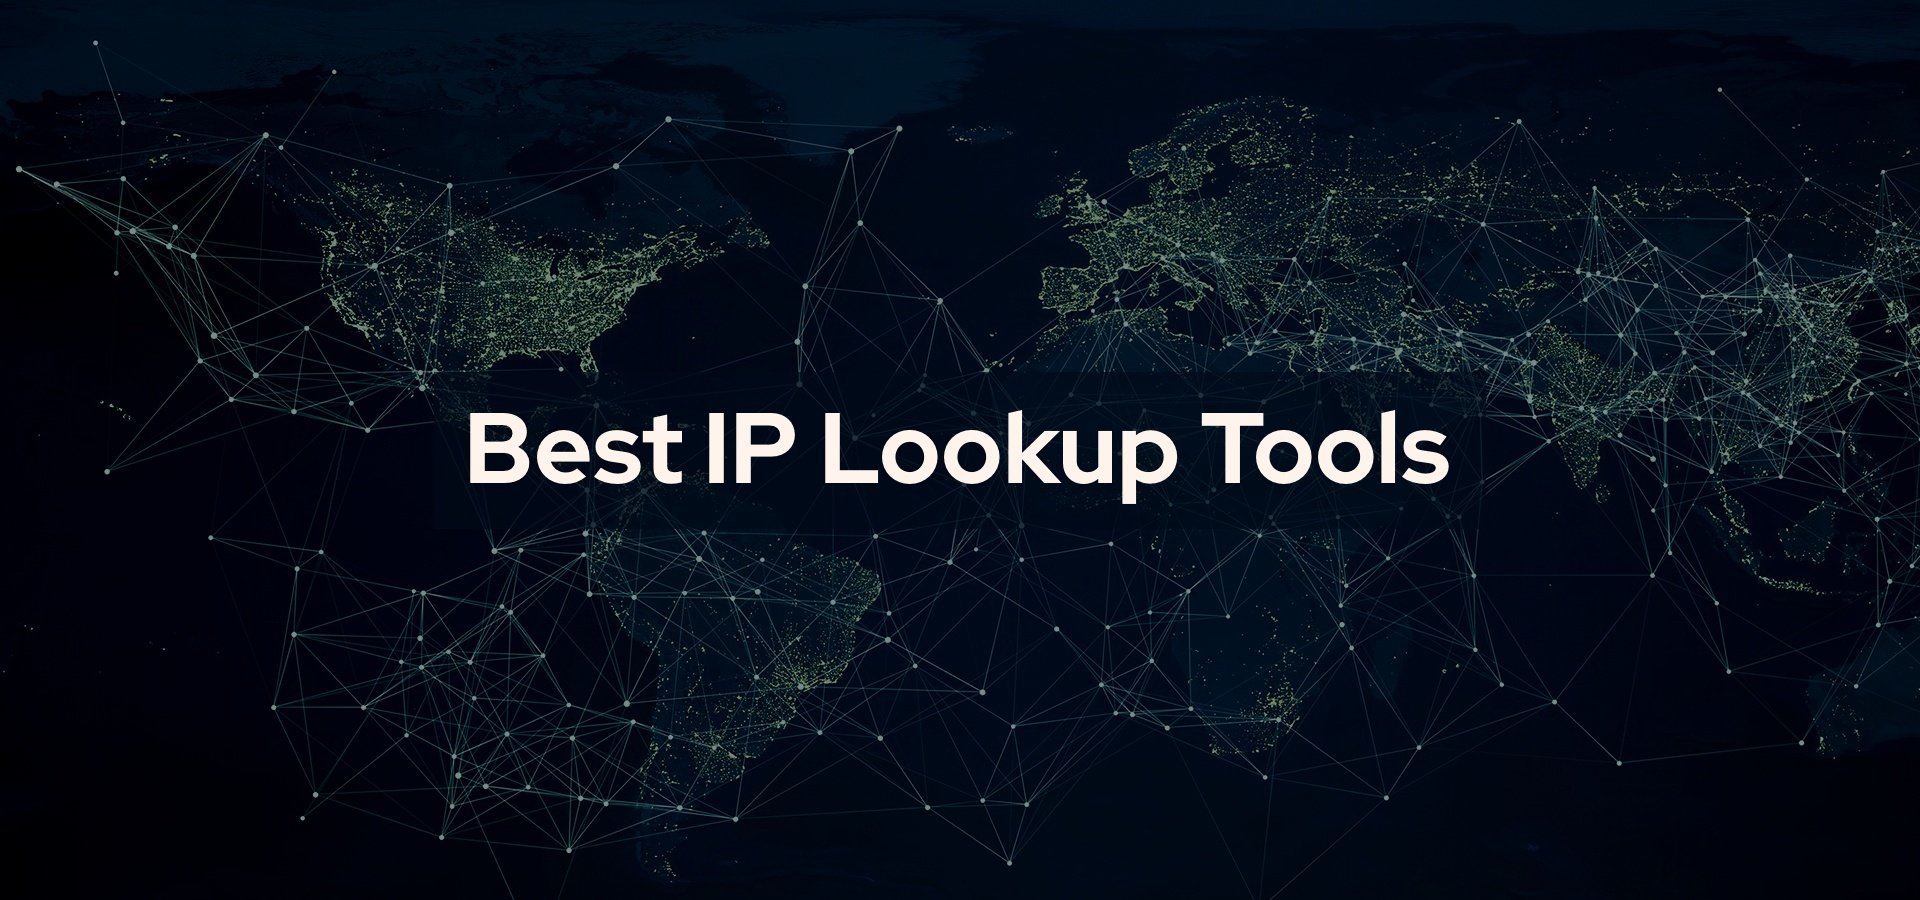 Search IP Whois Records and IP Blocks - DomainTools